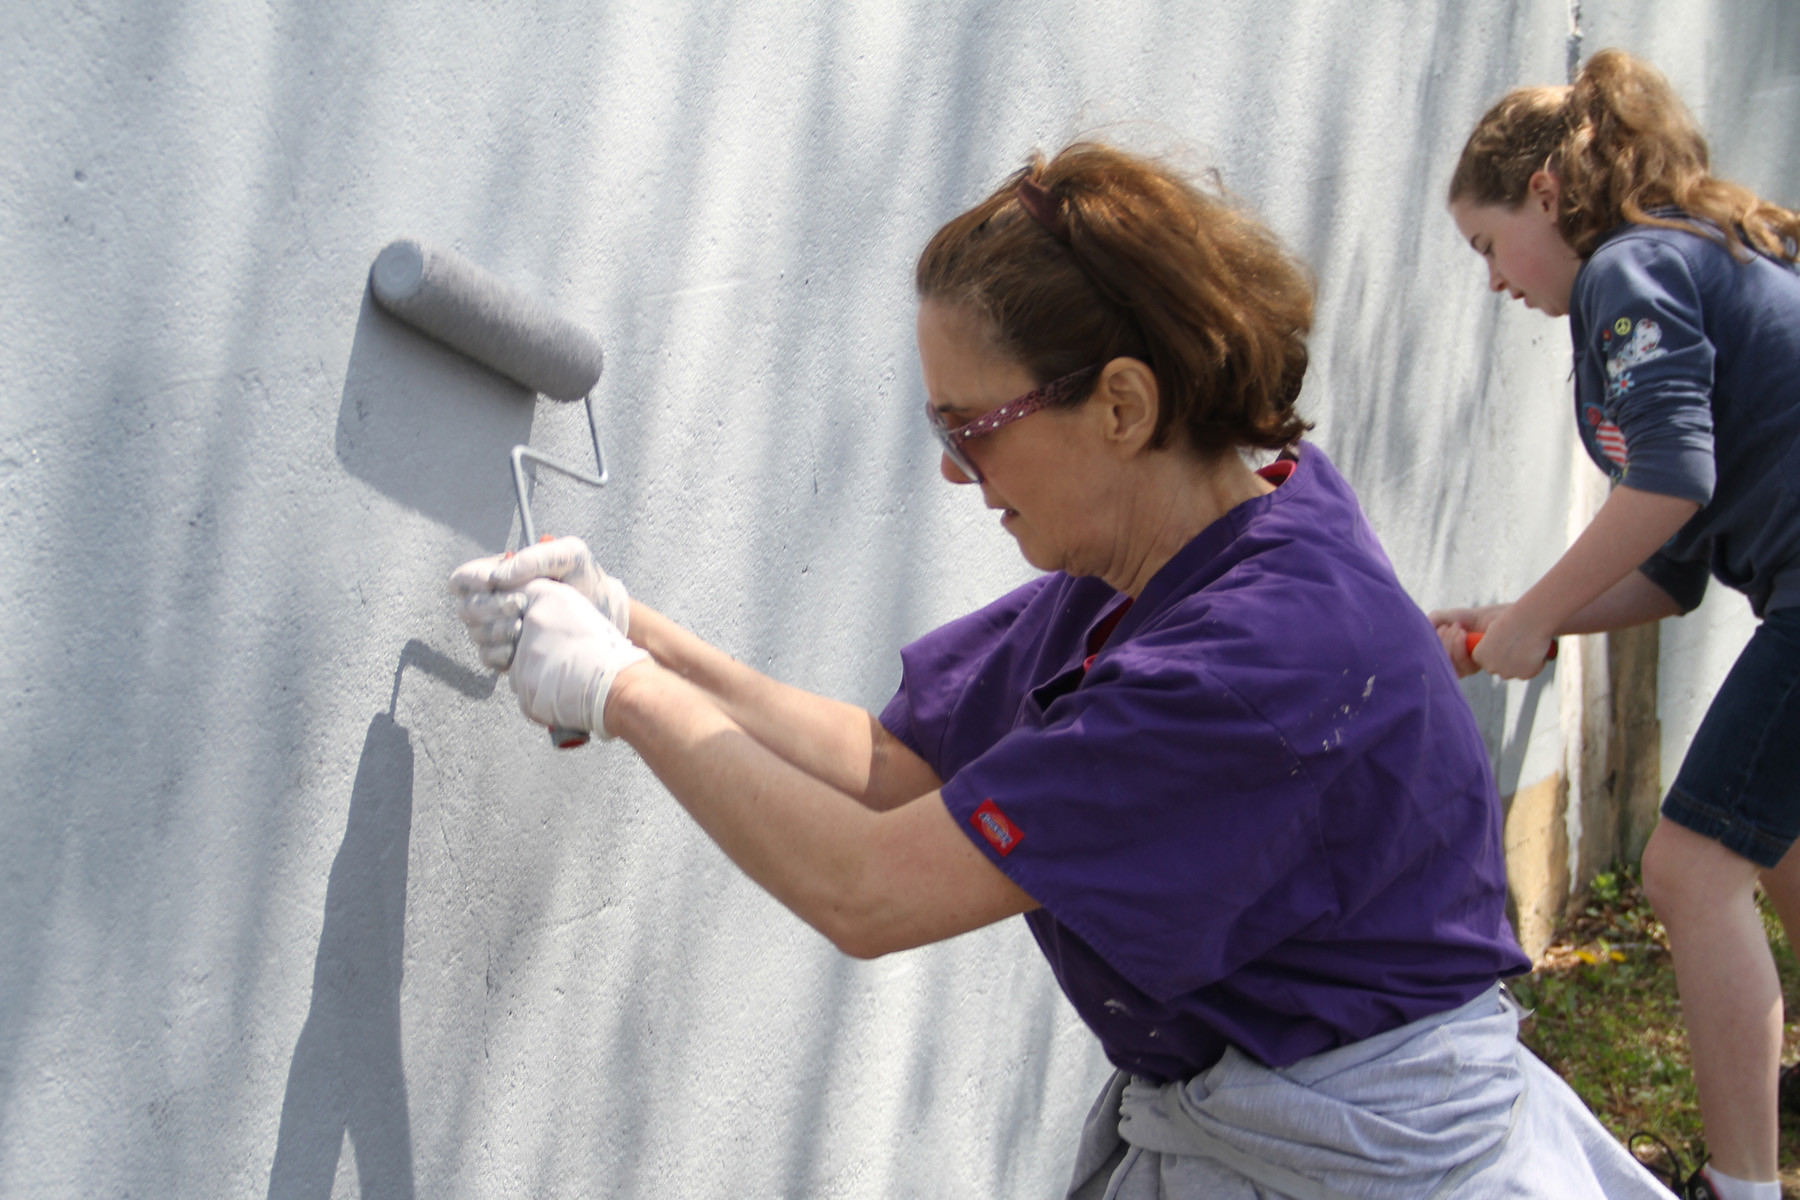 Debbie Laskin and Erin Laxton were among the many volunteers from Envision Valley Stream who painted the Long Island Rail Road trestle wall on April 28.